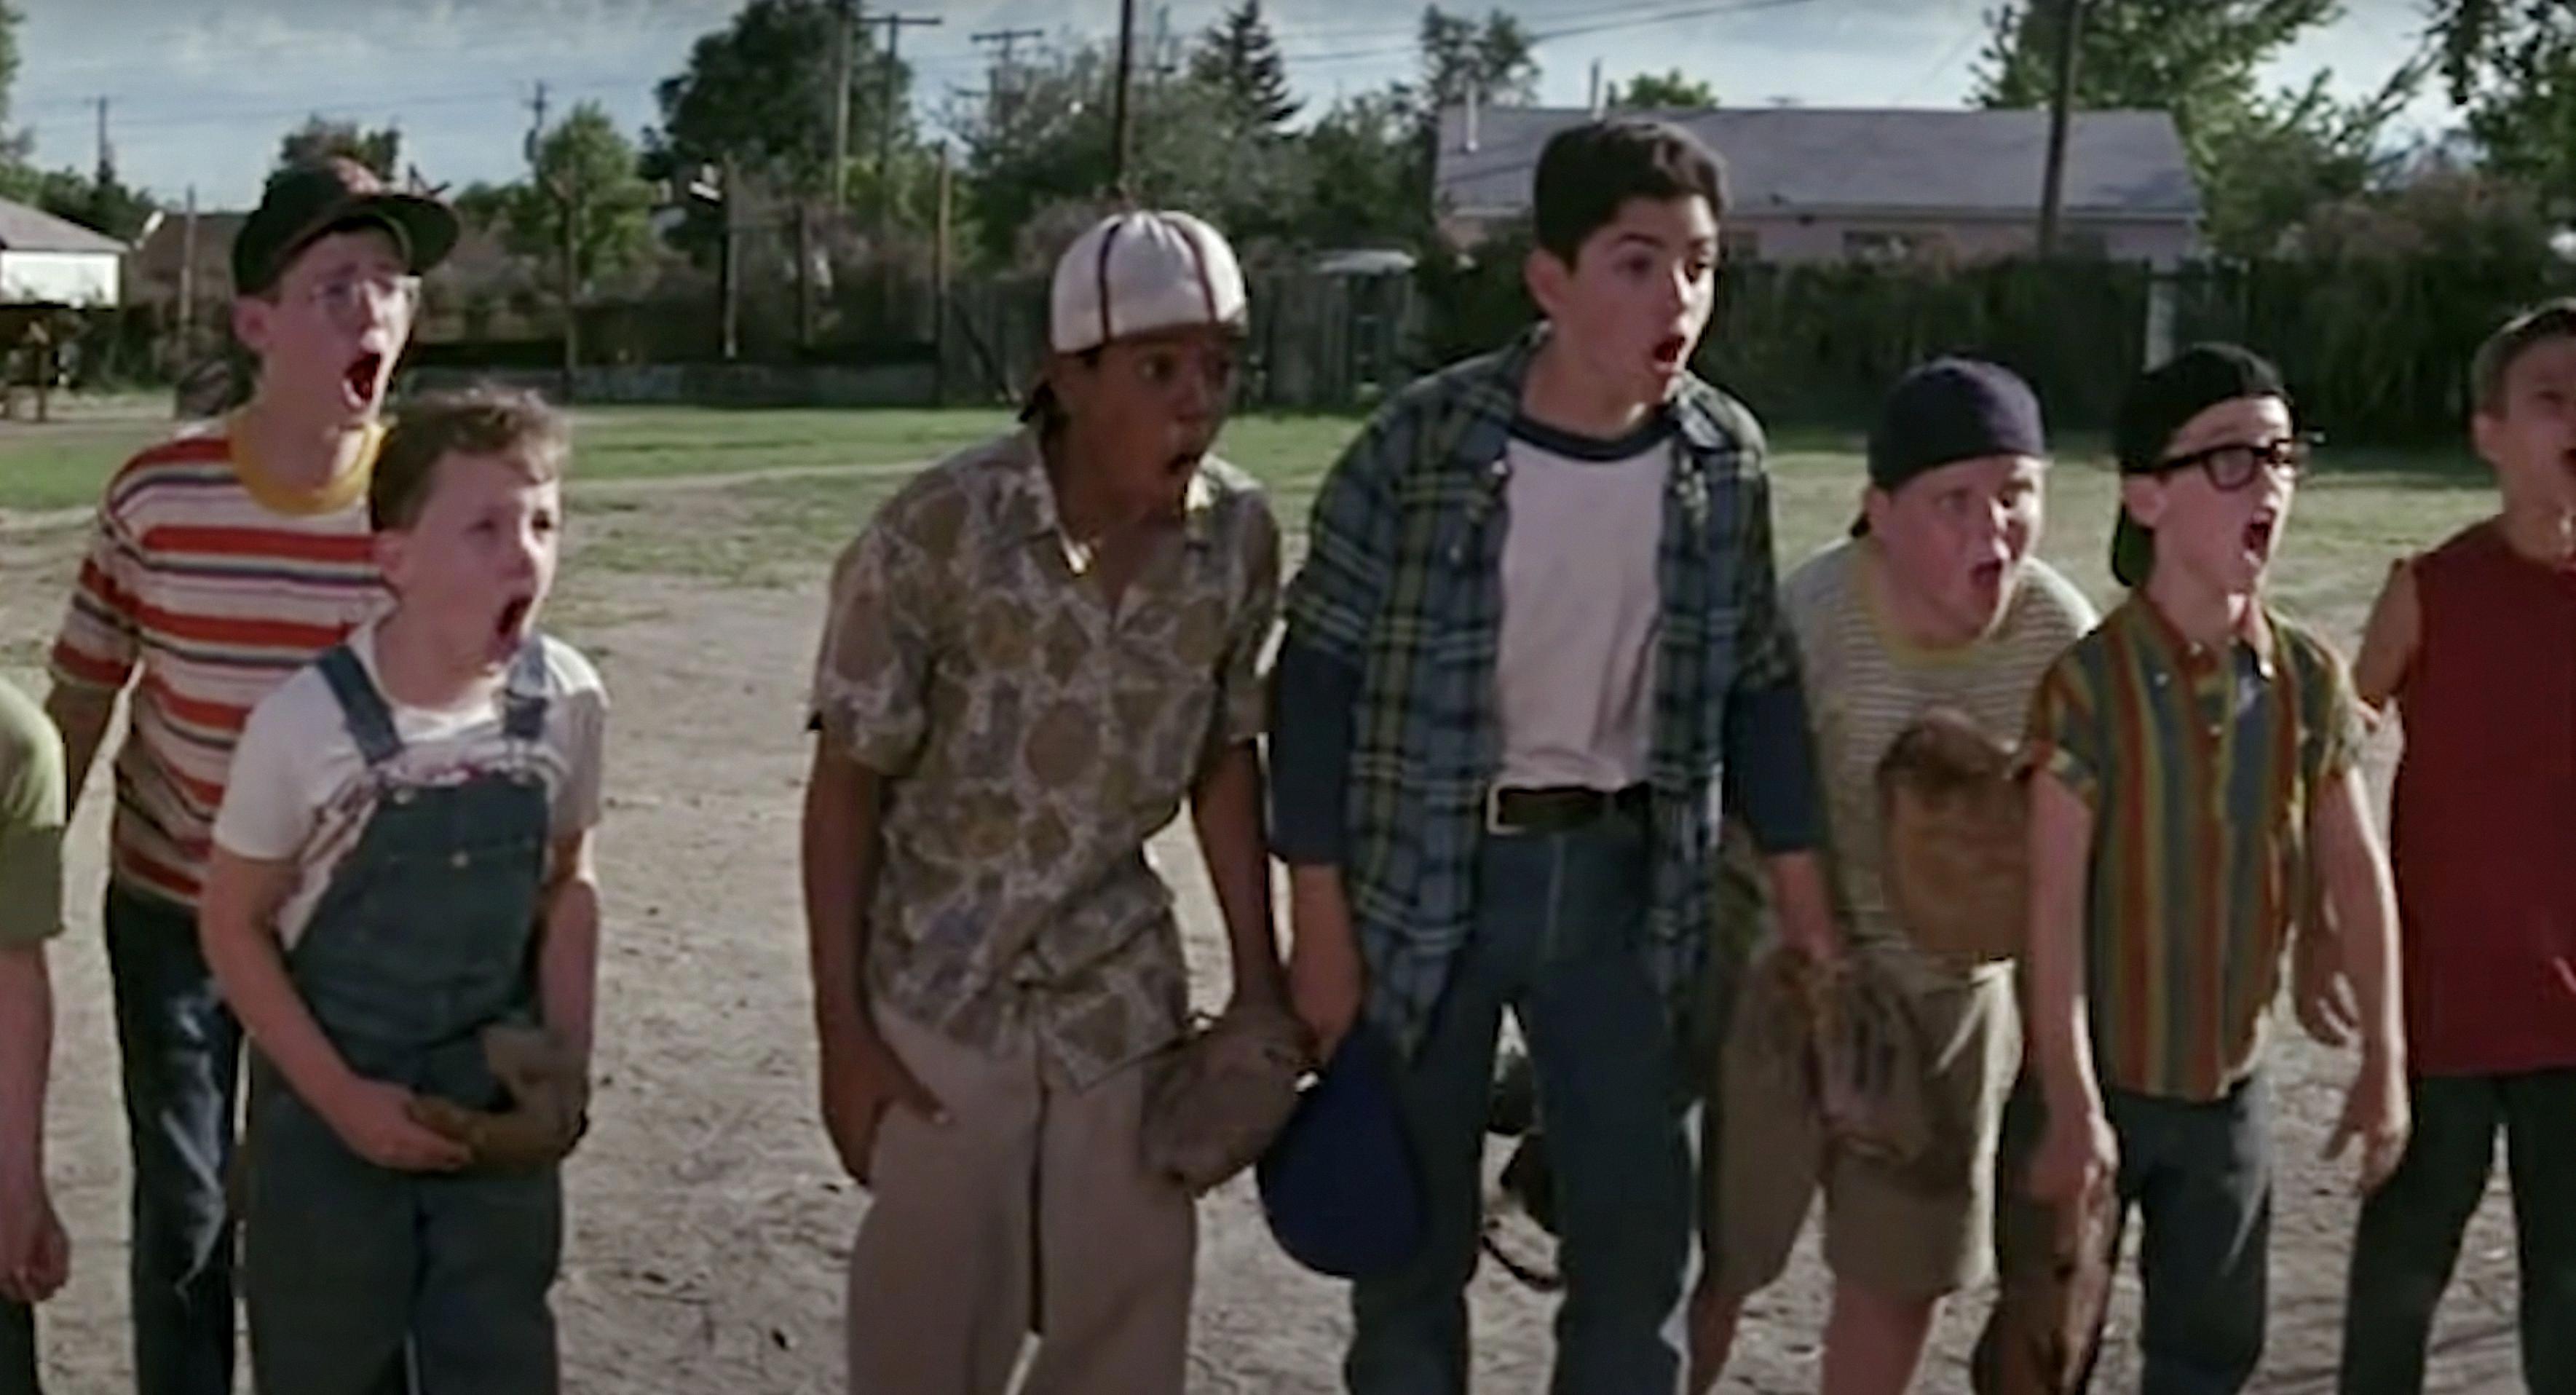 Benny From 'The Sandlot': Where is He Now?